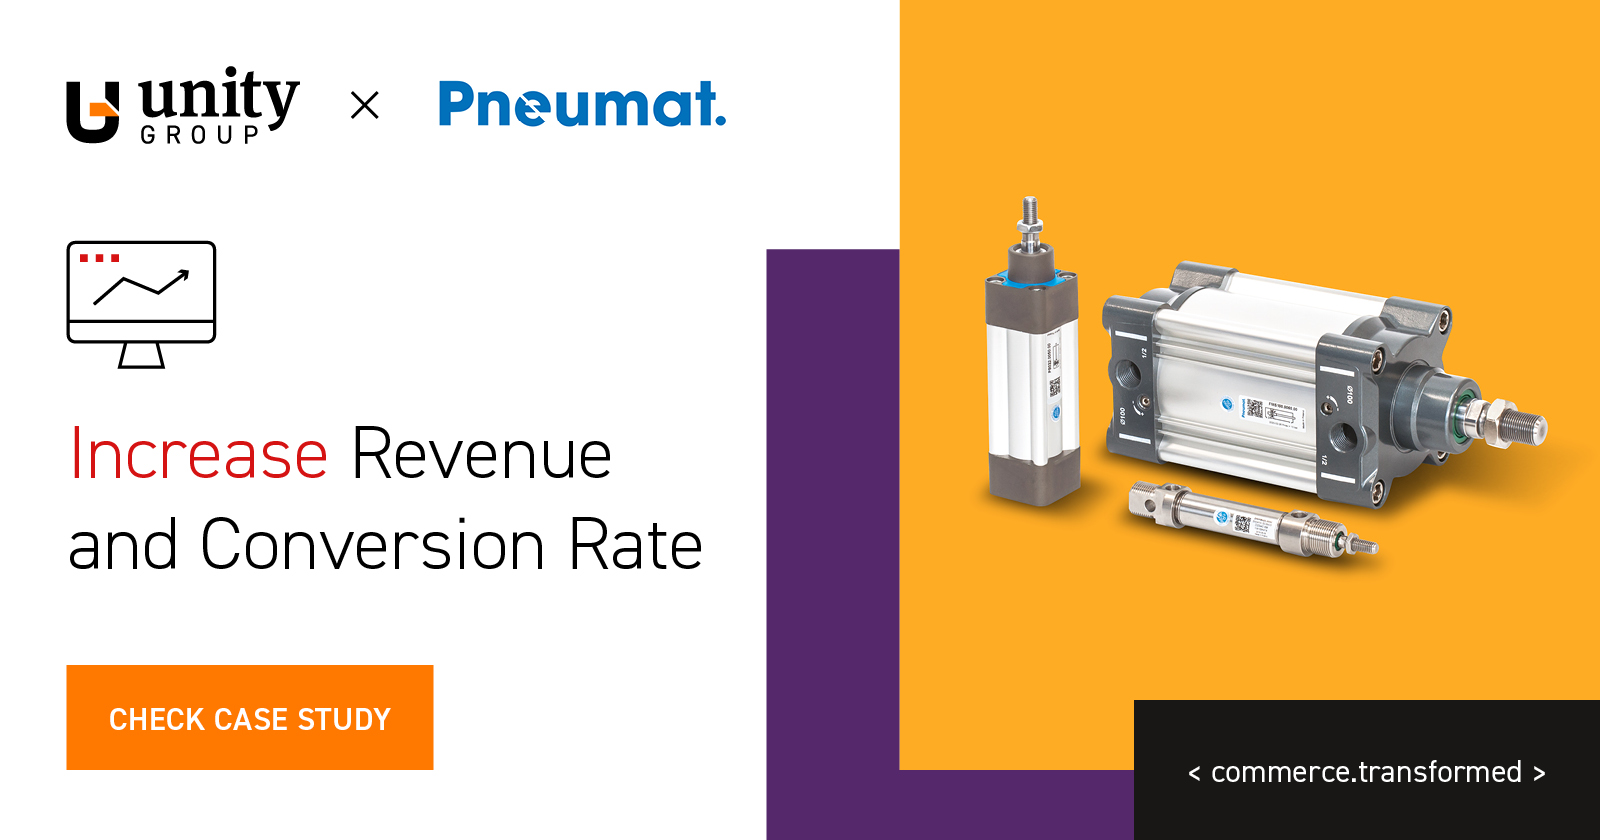 Increased revenue and conversion rate for Pneumat company